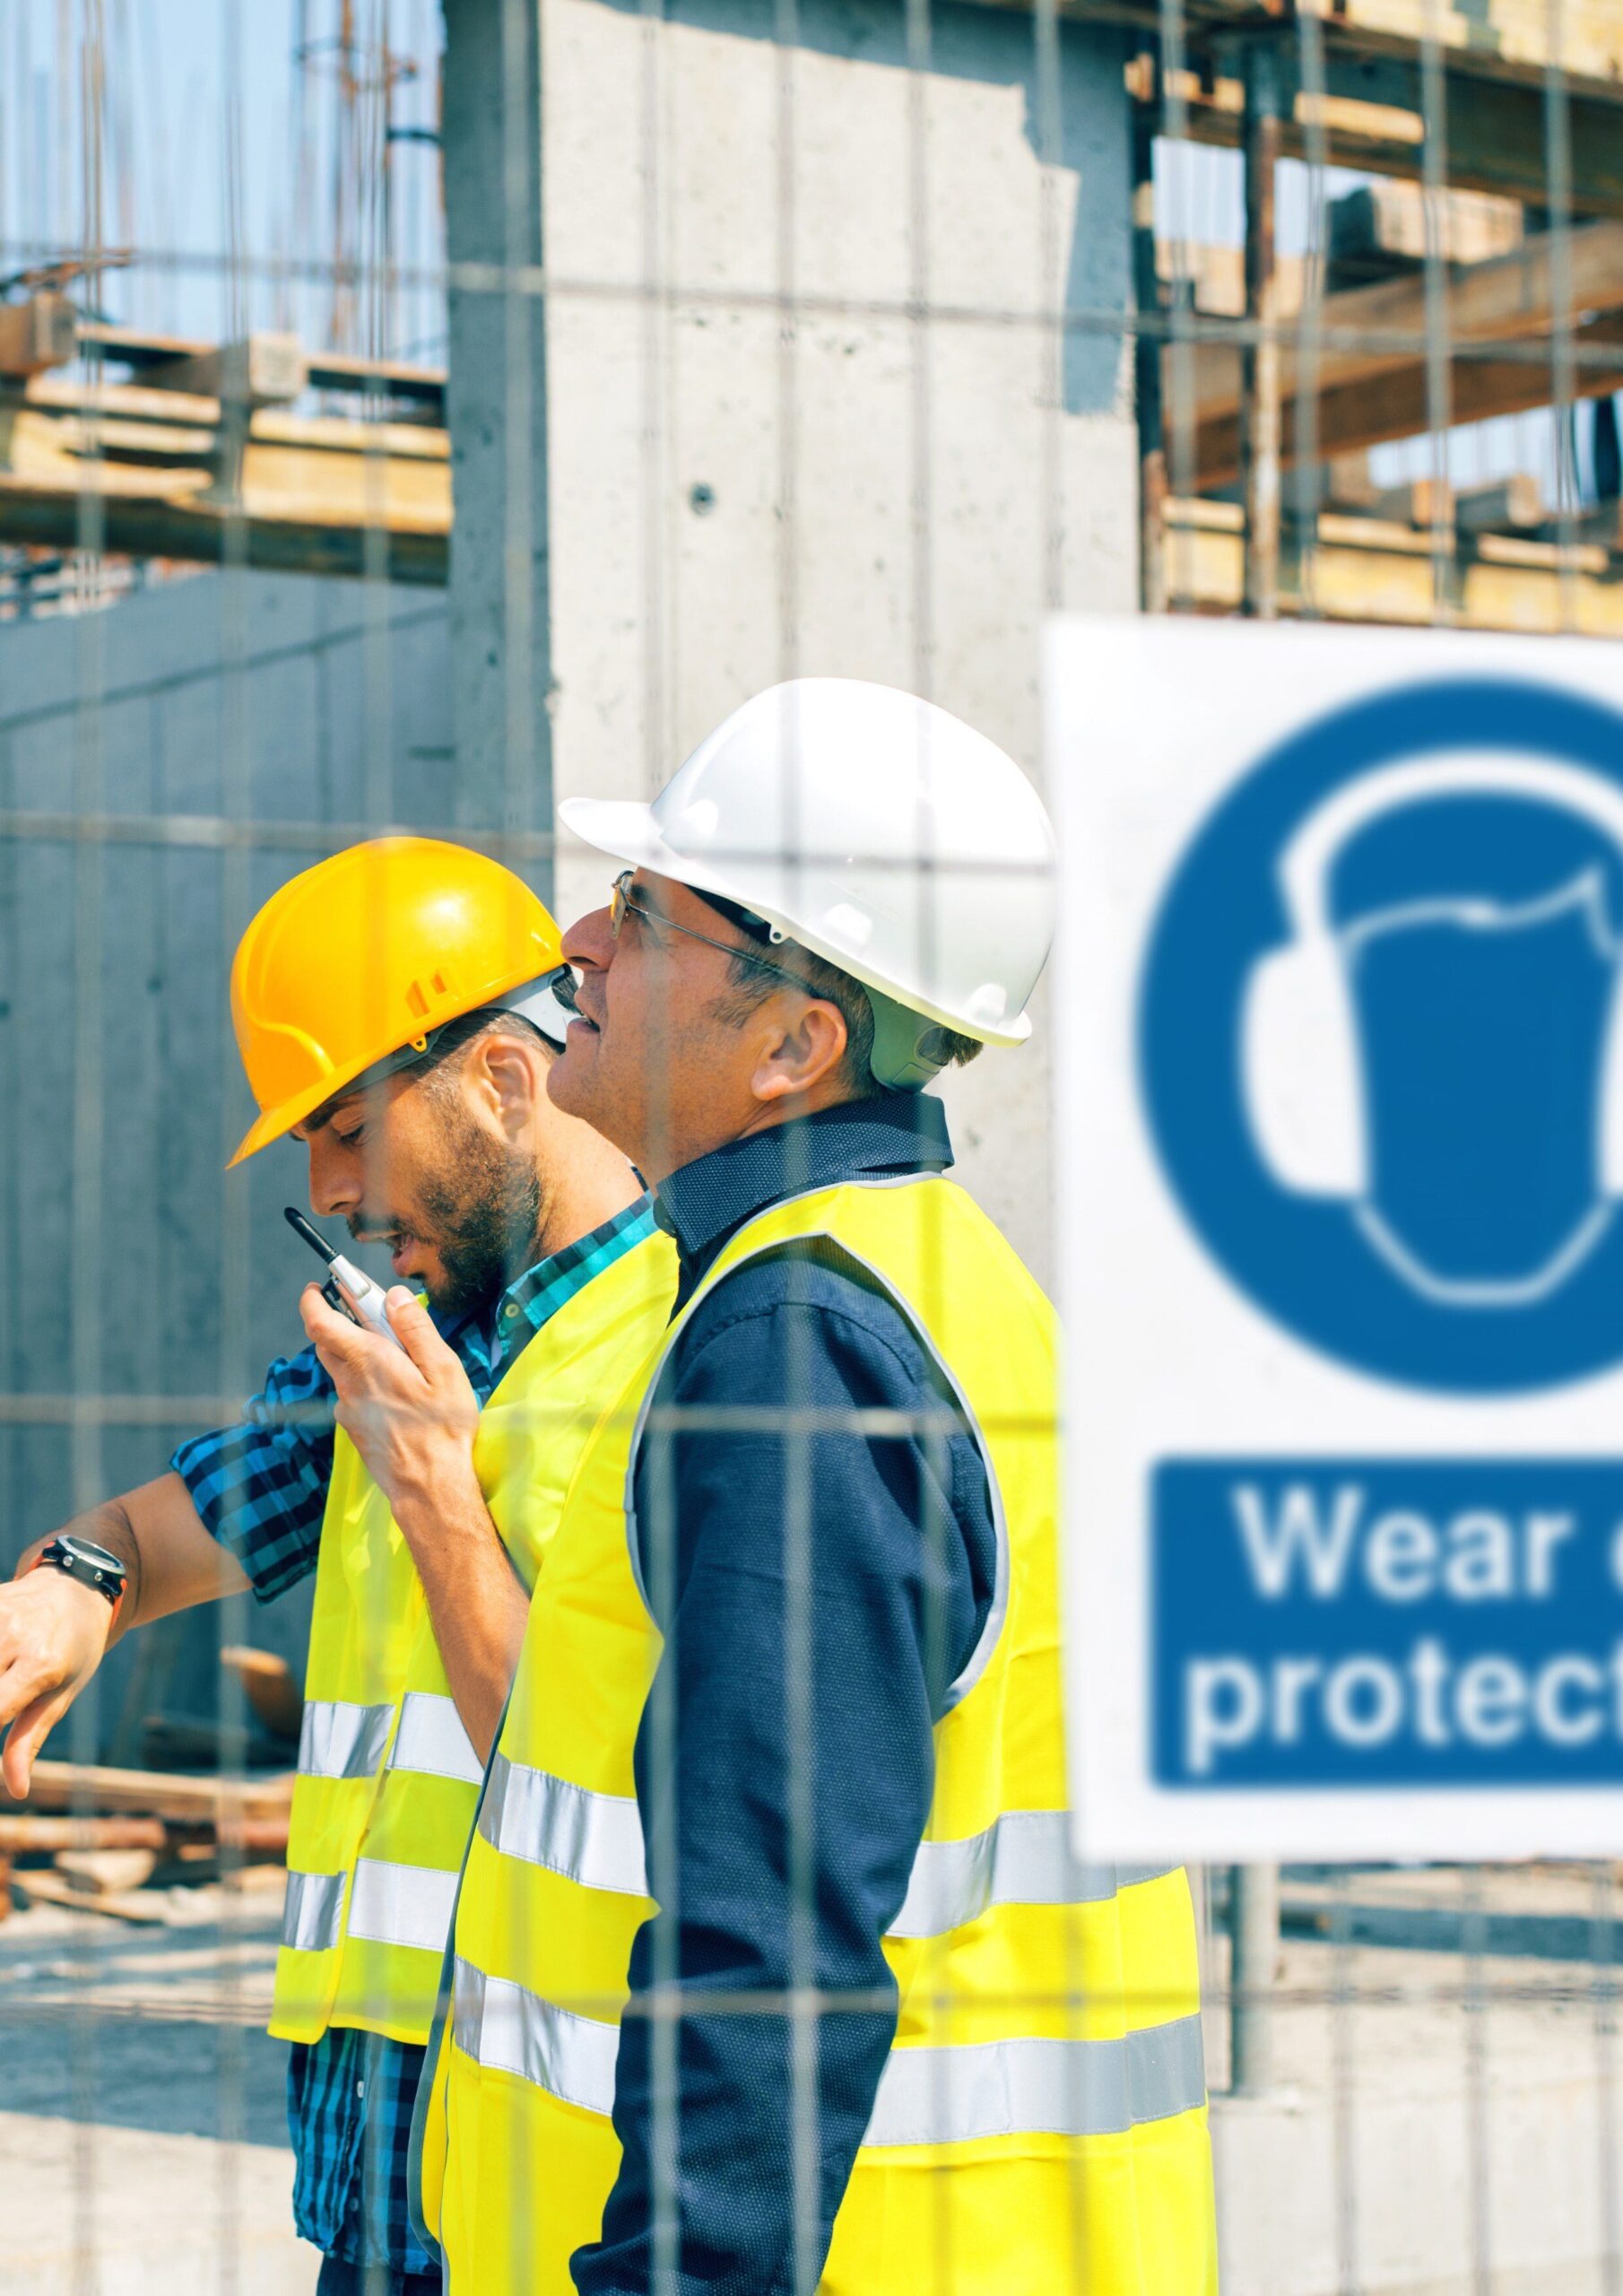 Workplace health and safety: is traditional signage enough?